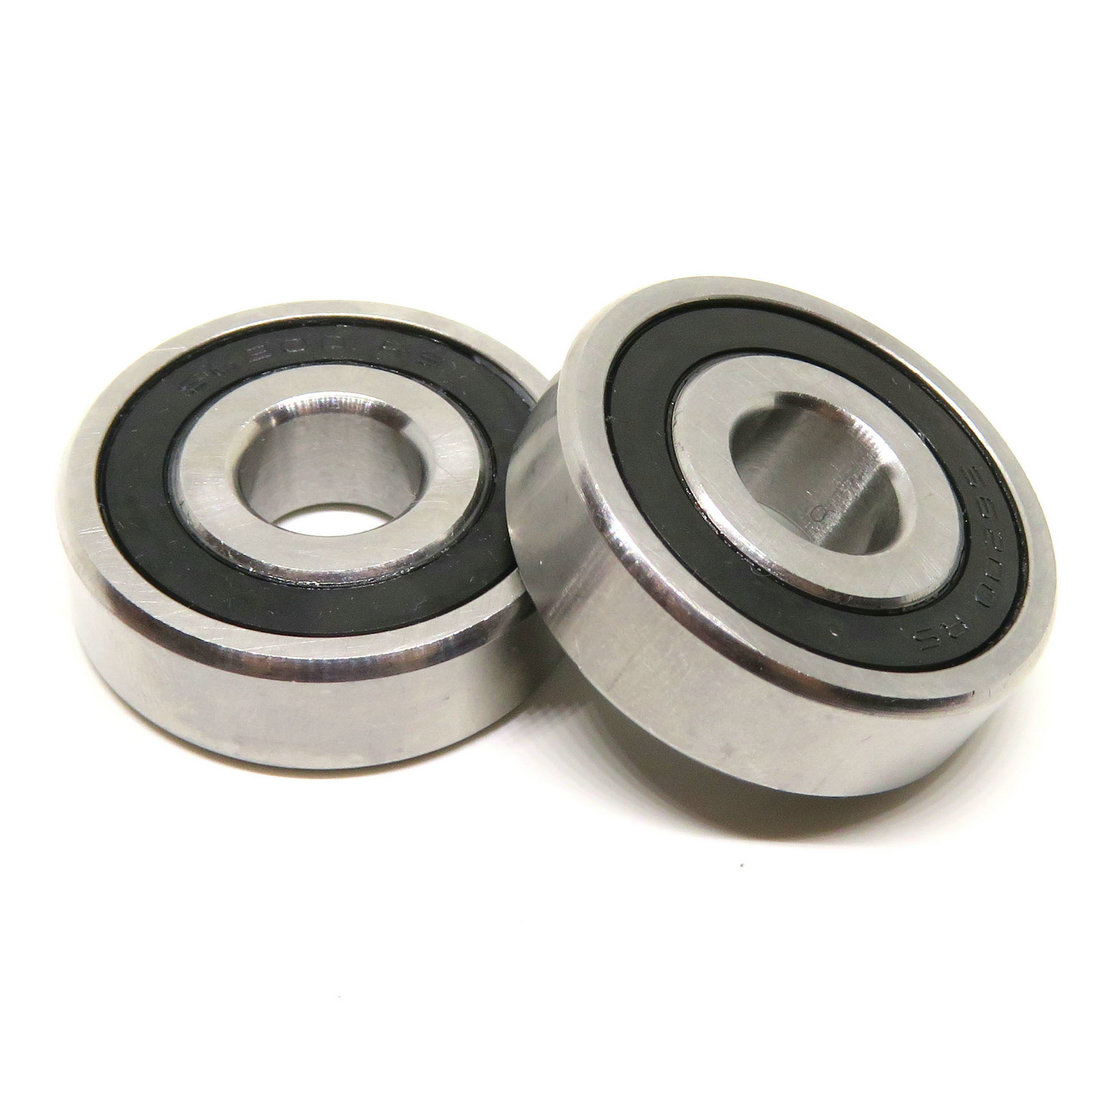 S6303-2RS AISI 440C Stainless Steel Ball Bearing 17x47x14mm For Heavier Load Capacity Applications.jpg